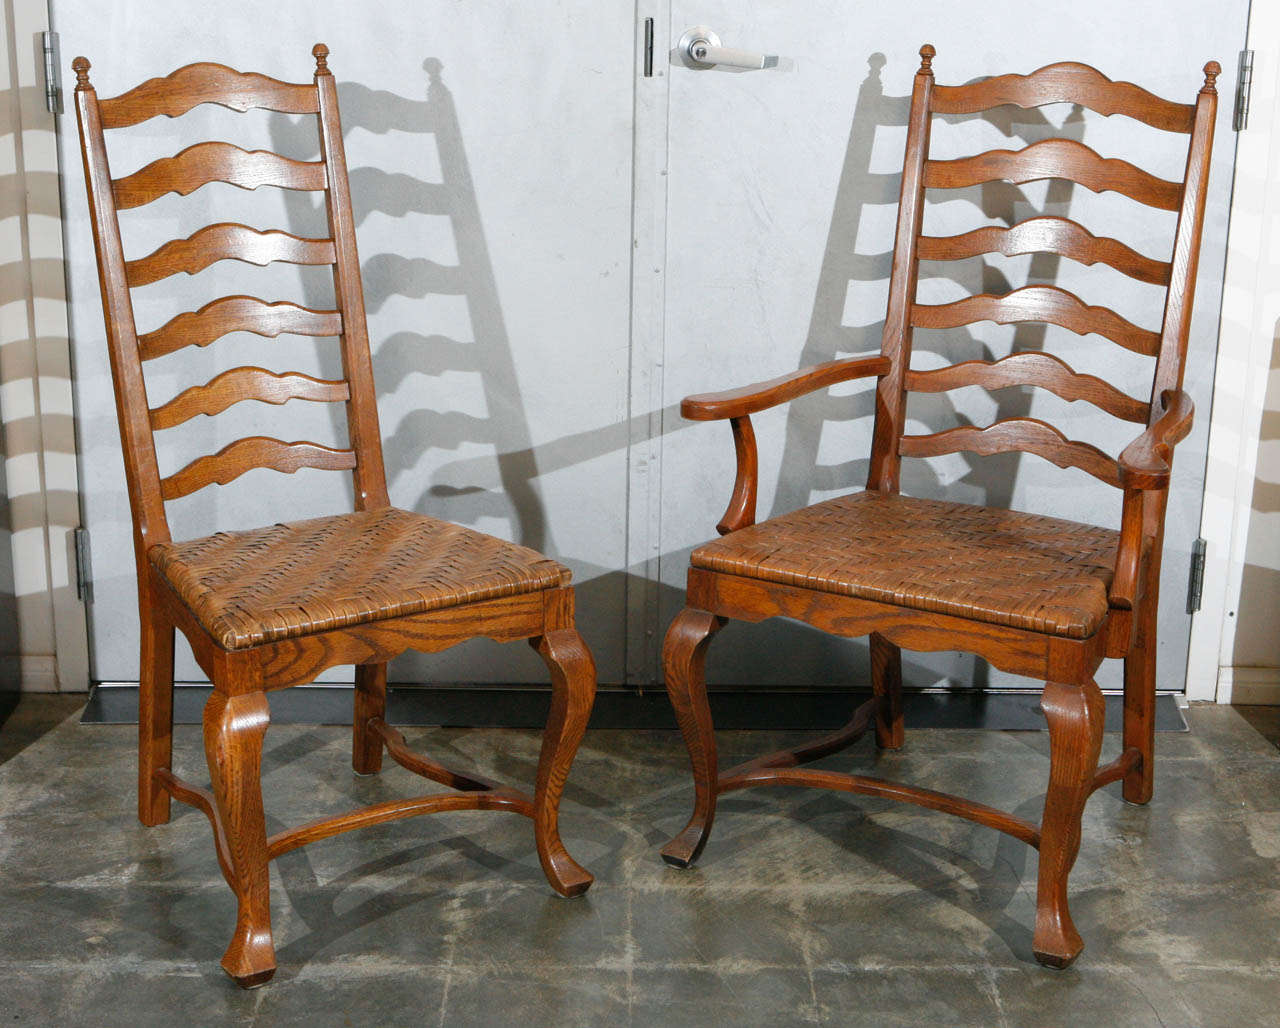 This charming set of dining chairs with: out turned legs, shaped stretchers, unique woven split oak seats and tall pleasing designed ladder backs. This set is thought to be French and has two arm and four side chairs. The set will suit a variety of